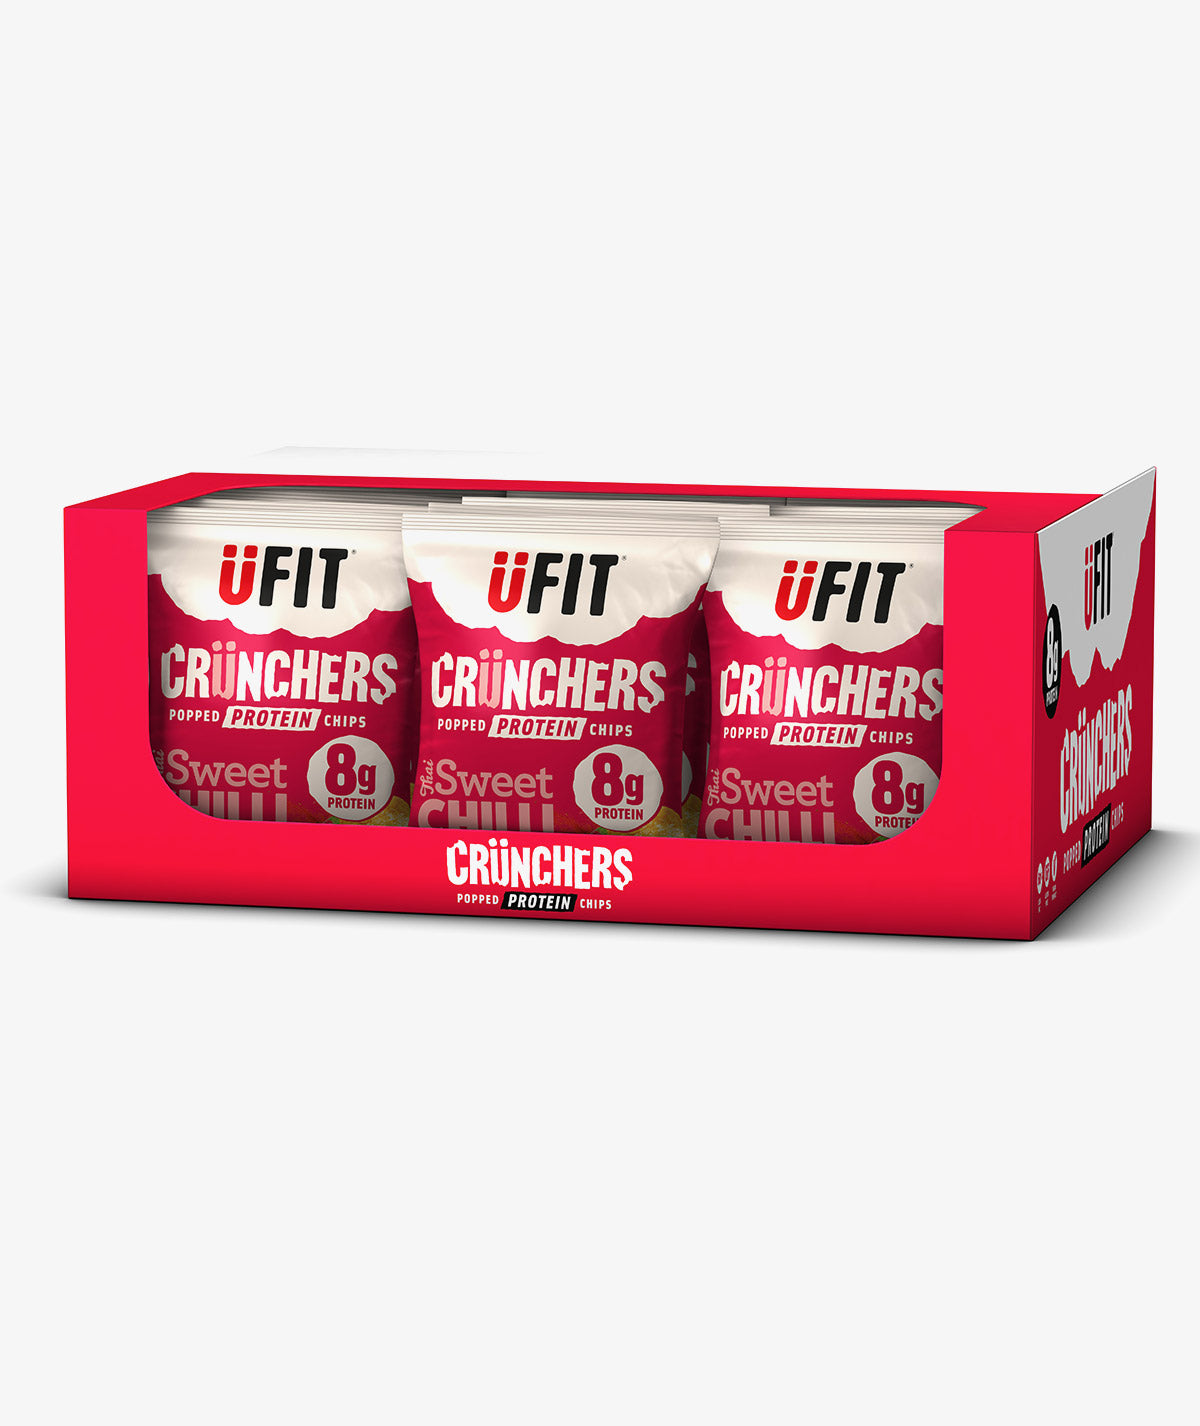 UFIT CRUNCHERS - 3 BOXES OF 18 (54 BAGS)